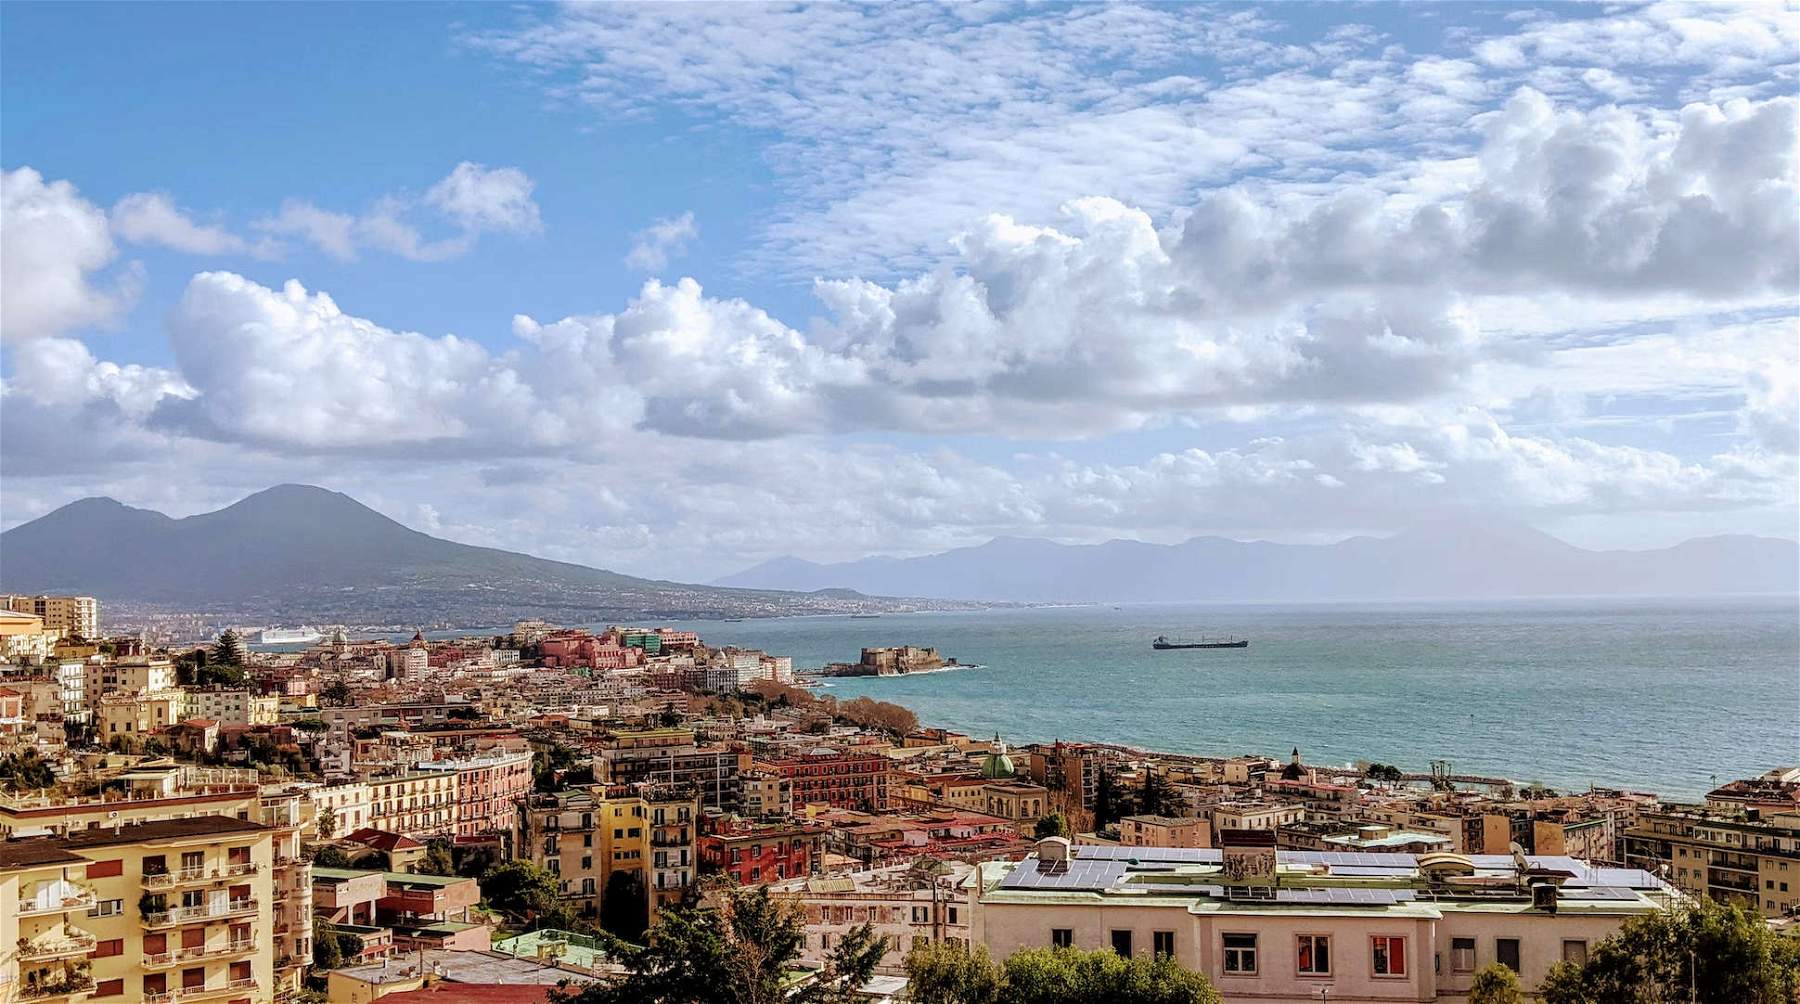 Naples, interventions on cultural assets in the historic center start, more than 80 million euros